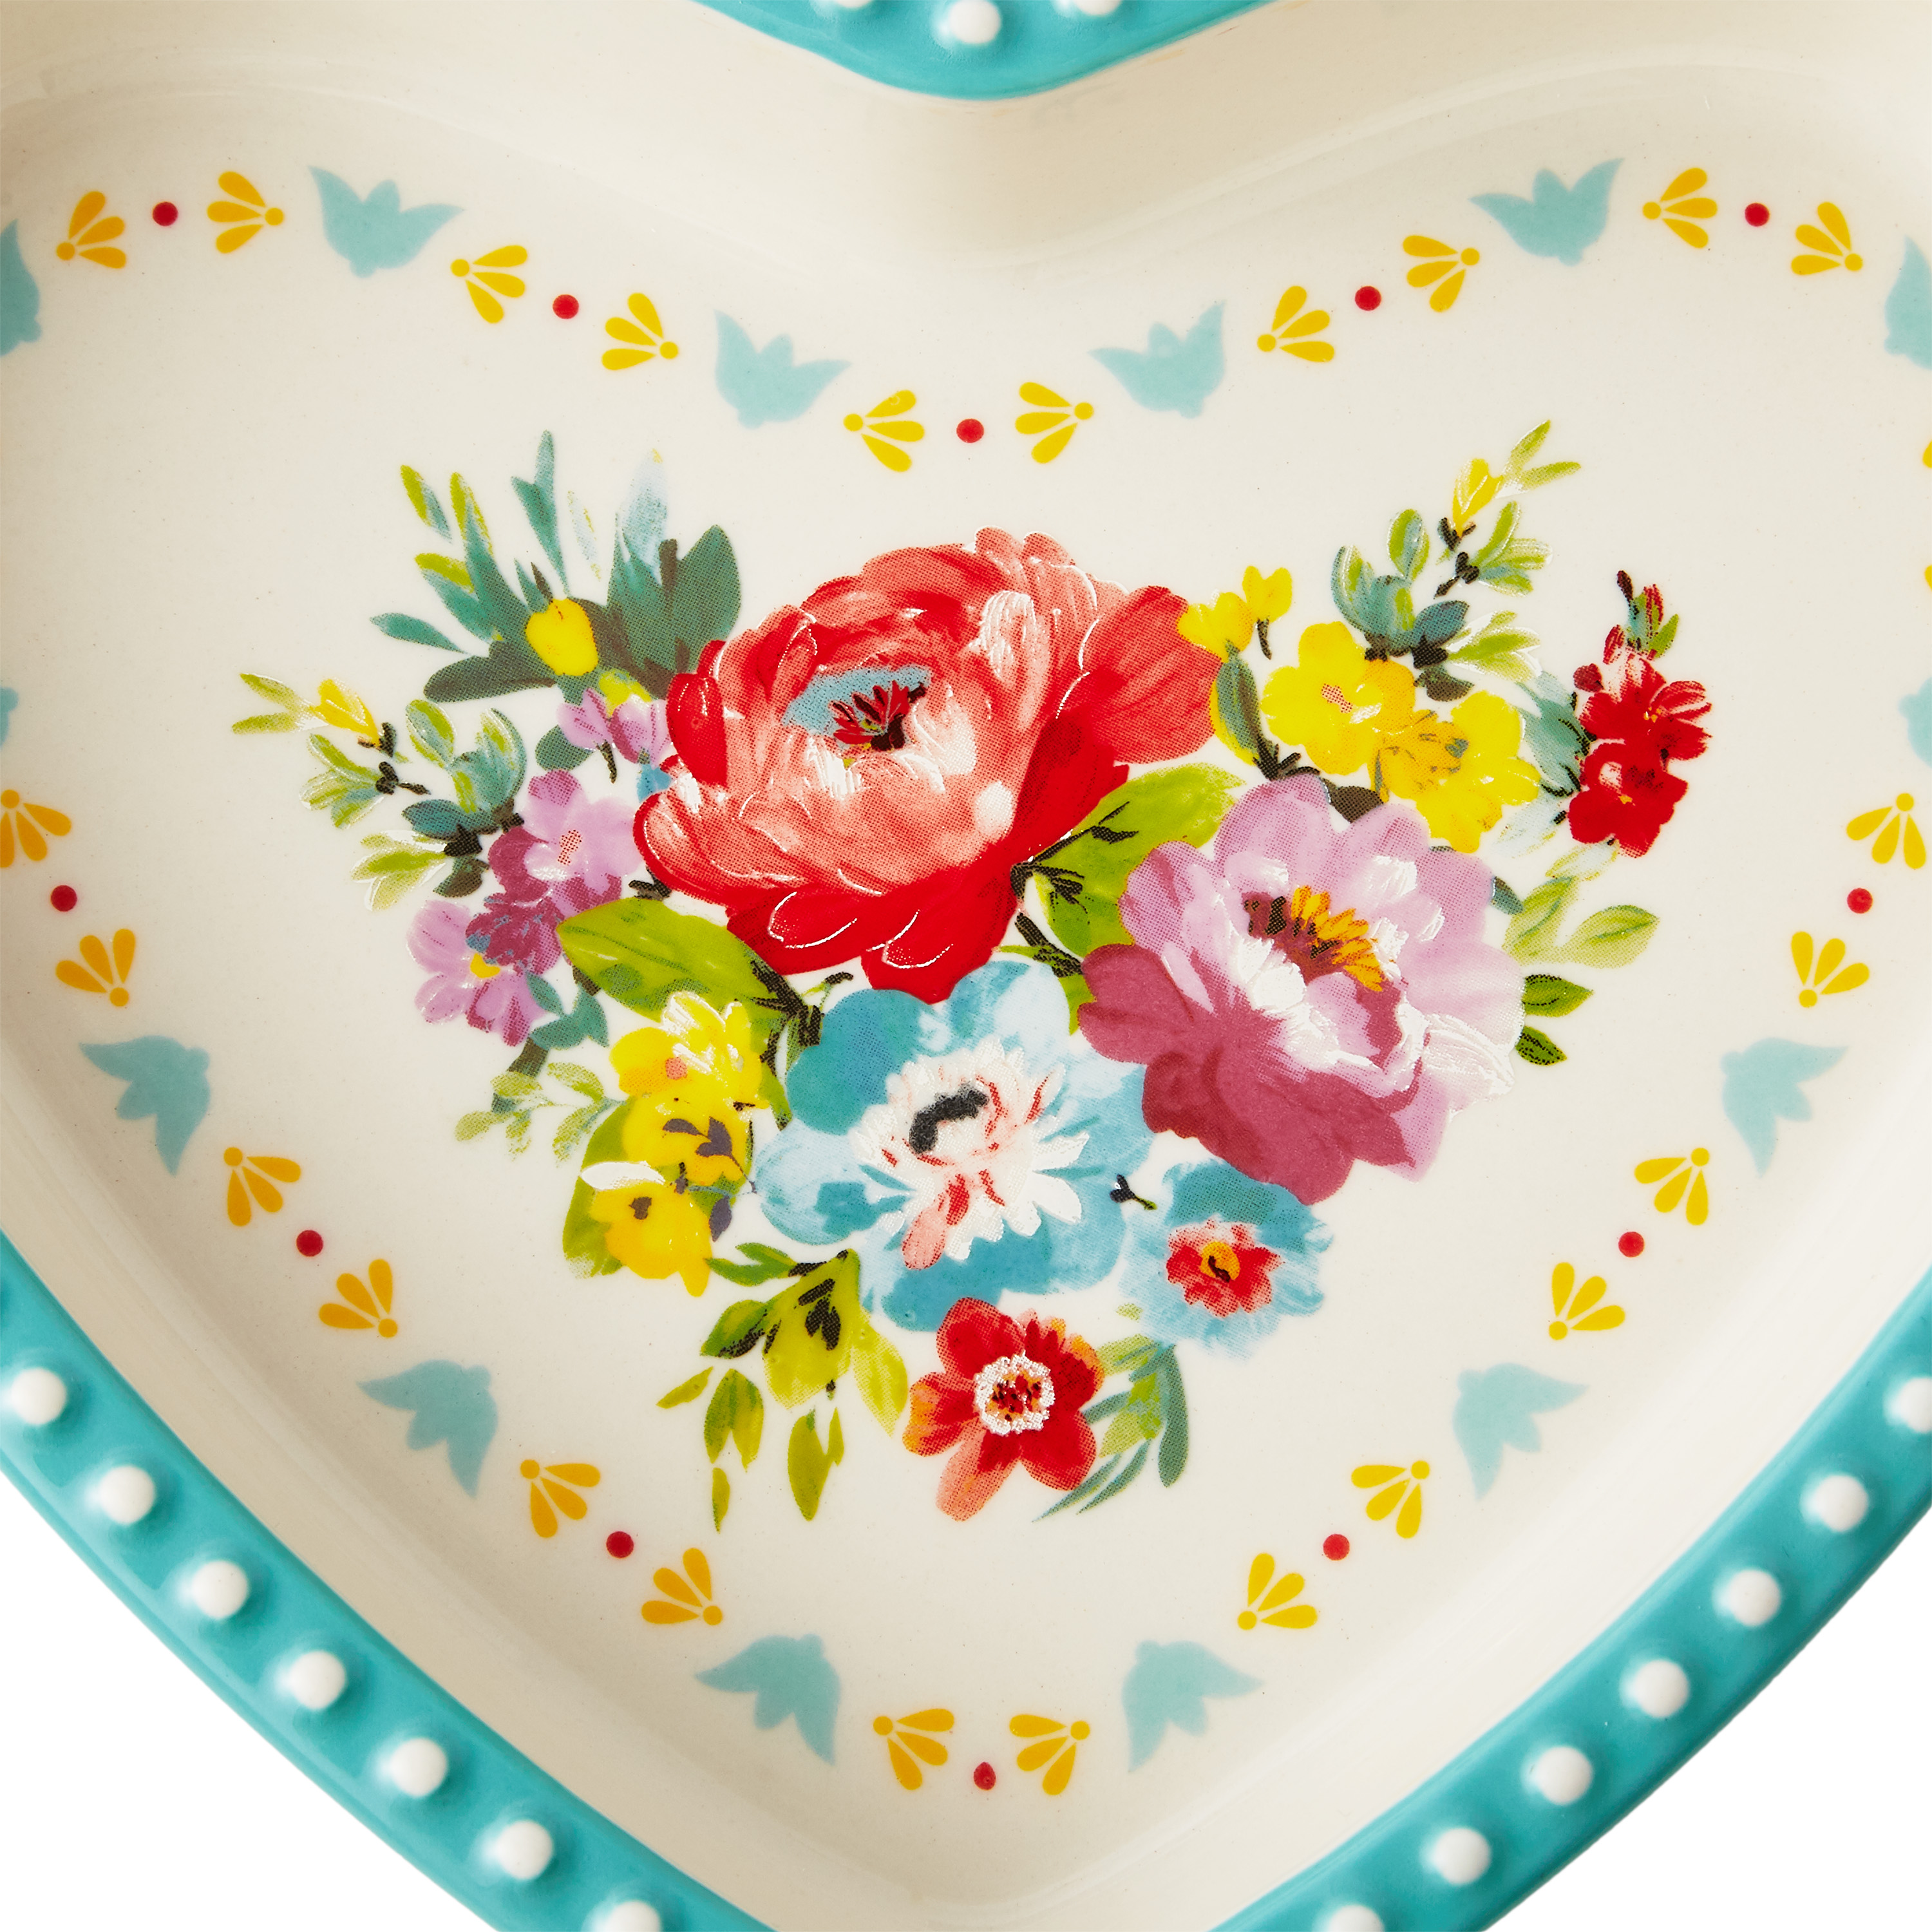 The Pioneer Woman 2-Piece Heart Shaped Ceramic Dish - image 4 of 5